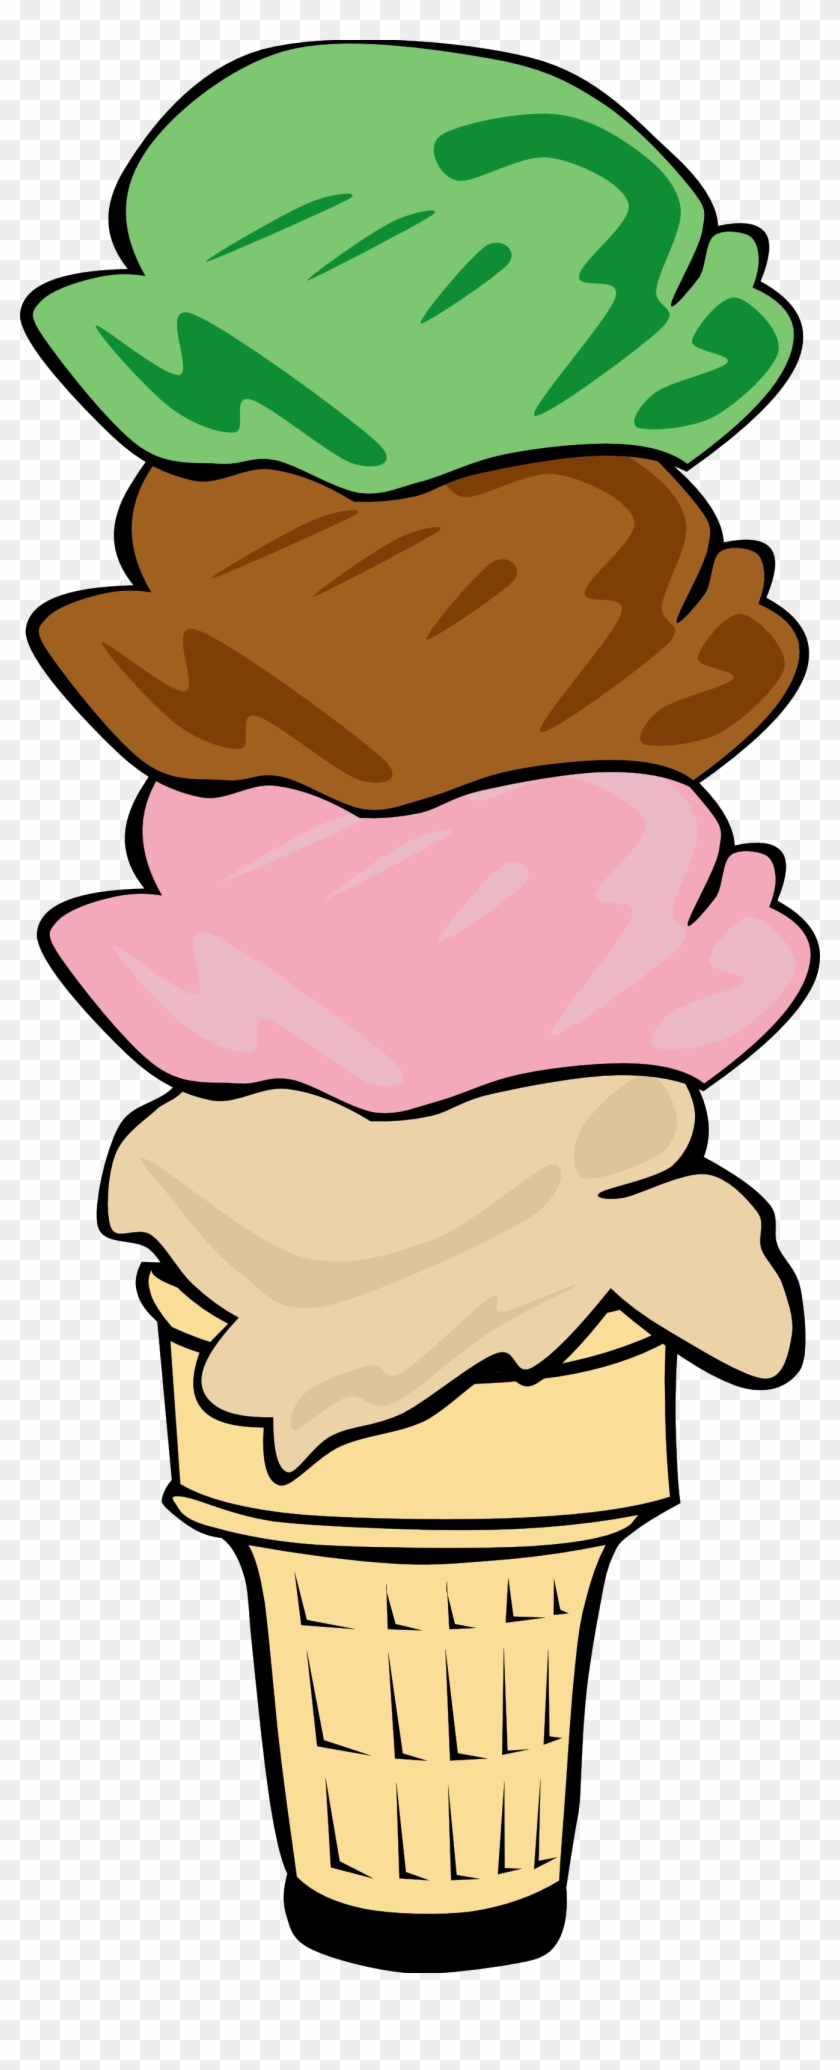 Ice Cream Social Clipart Black And White - 4 Scoops Of Ice Cream #172254